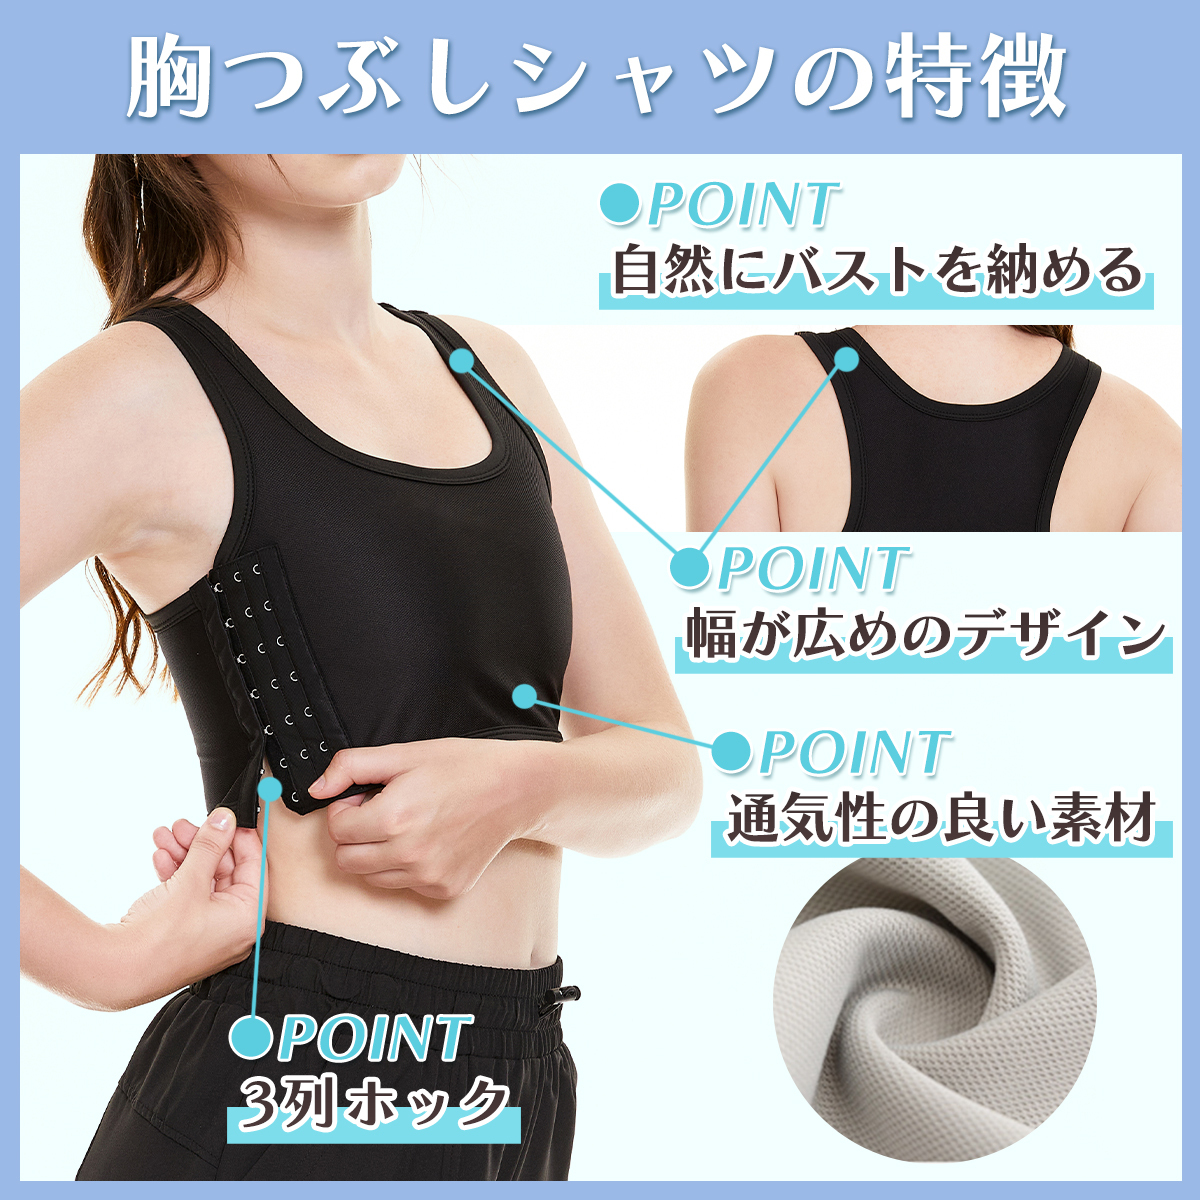 nabe shirt .... tank top inner .. a little show . joting prevention man equipment spo b rubber strap correction ...bla cosplay 